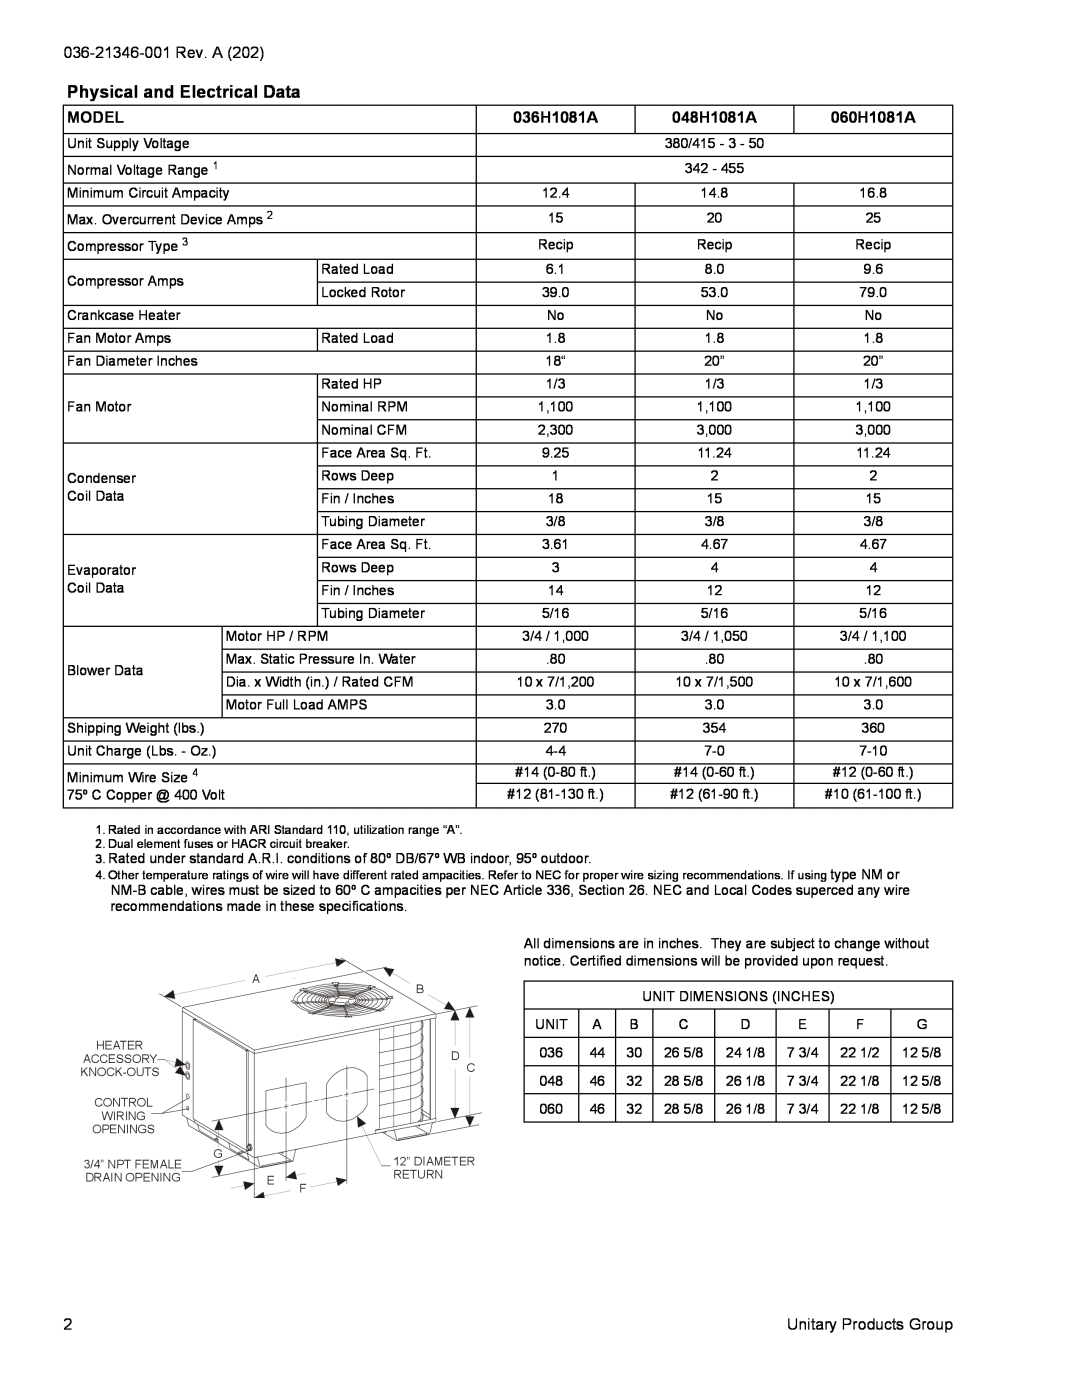 York PAC036 dimensions Physical and Electrical Data, Model, 036H1081A, 048H1081A, 060H1081A 